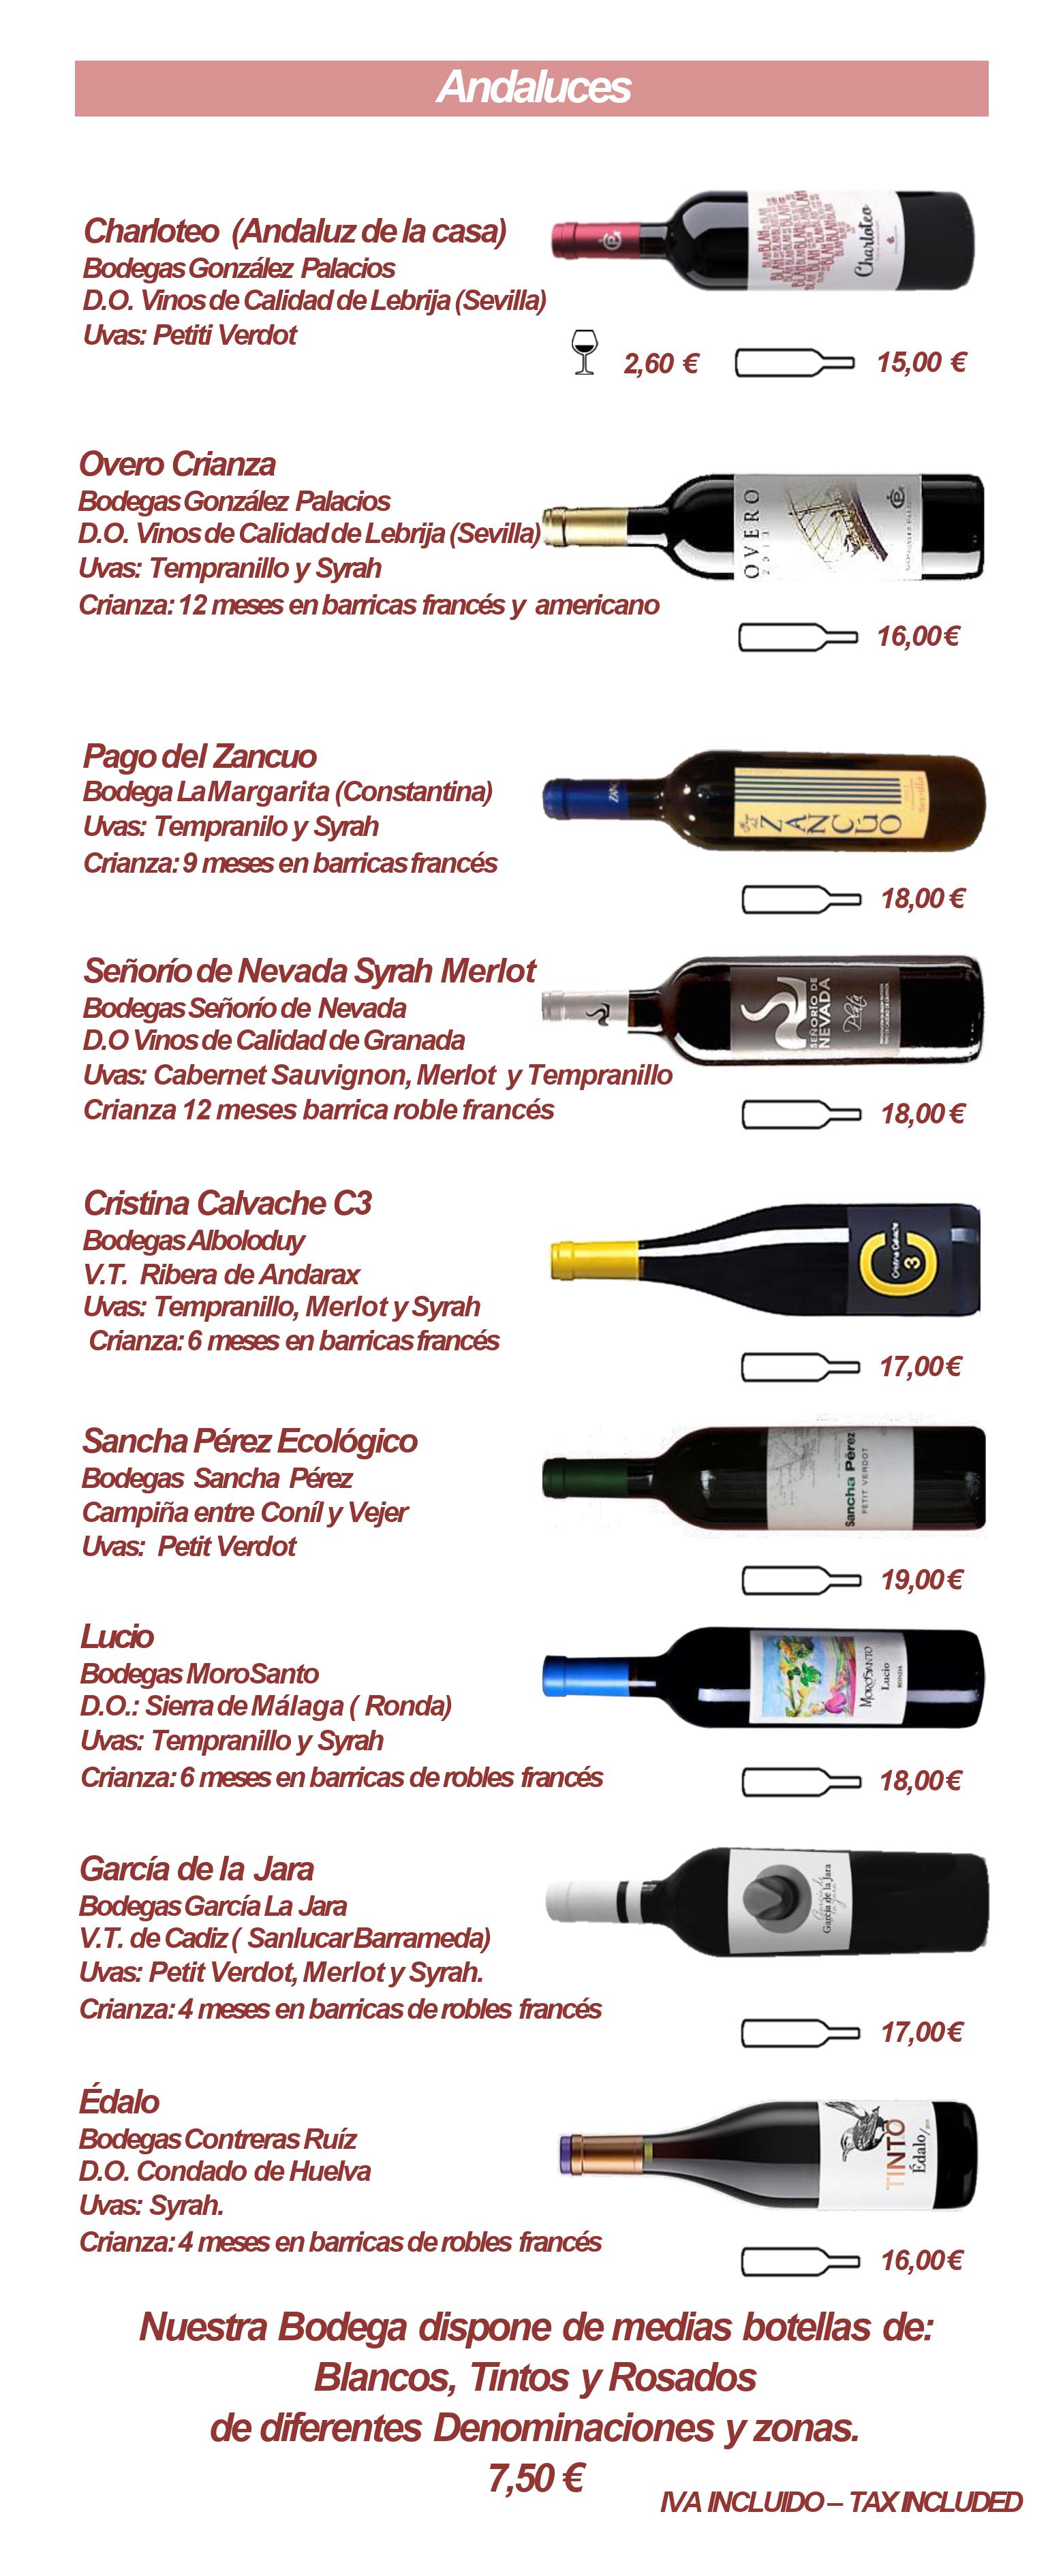 VINS ANDALUSOS